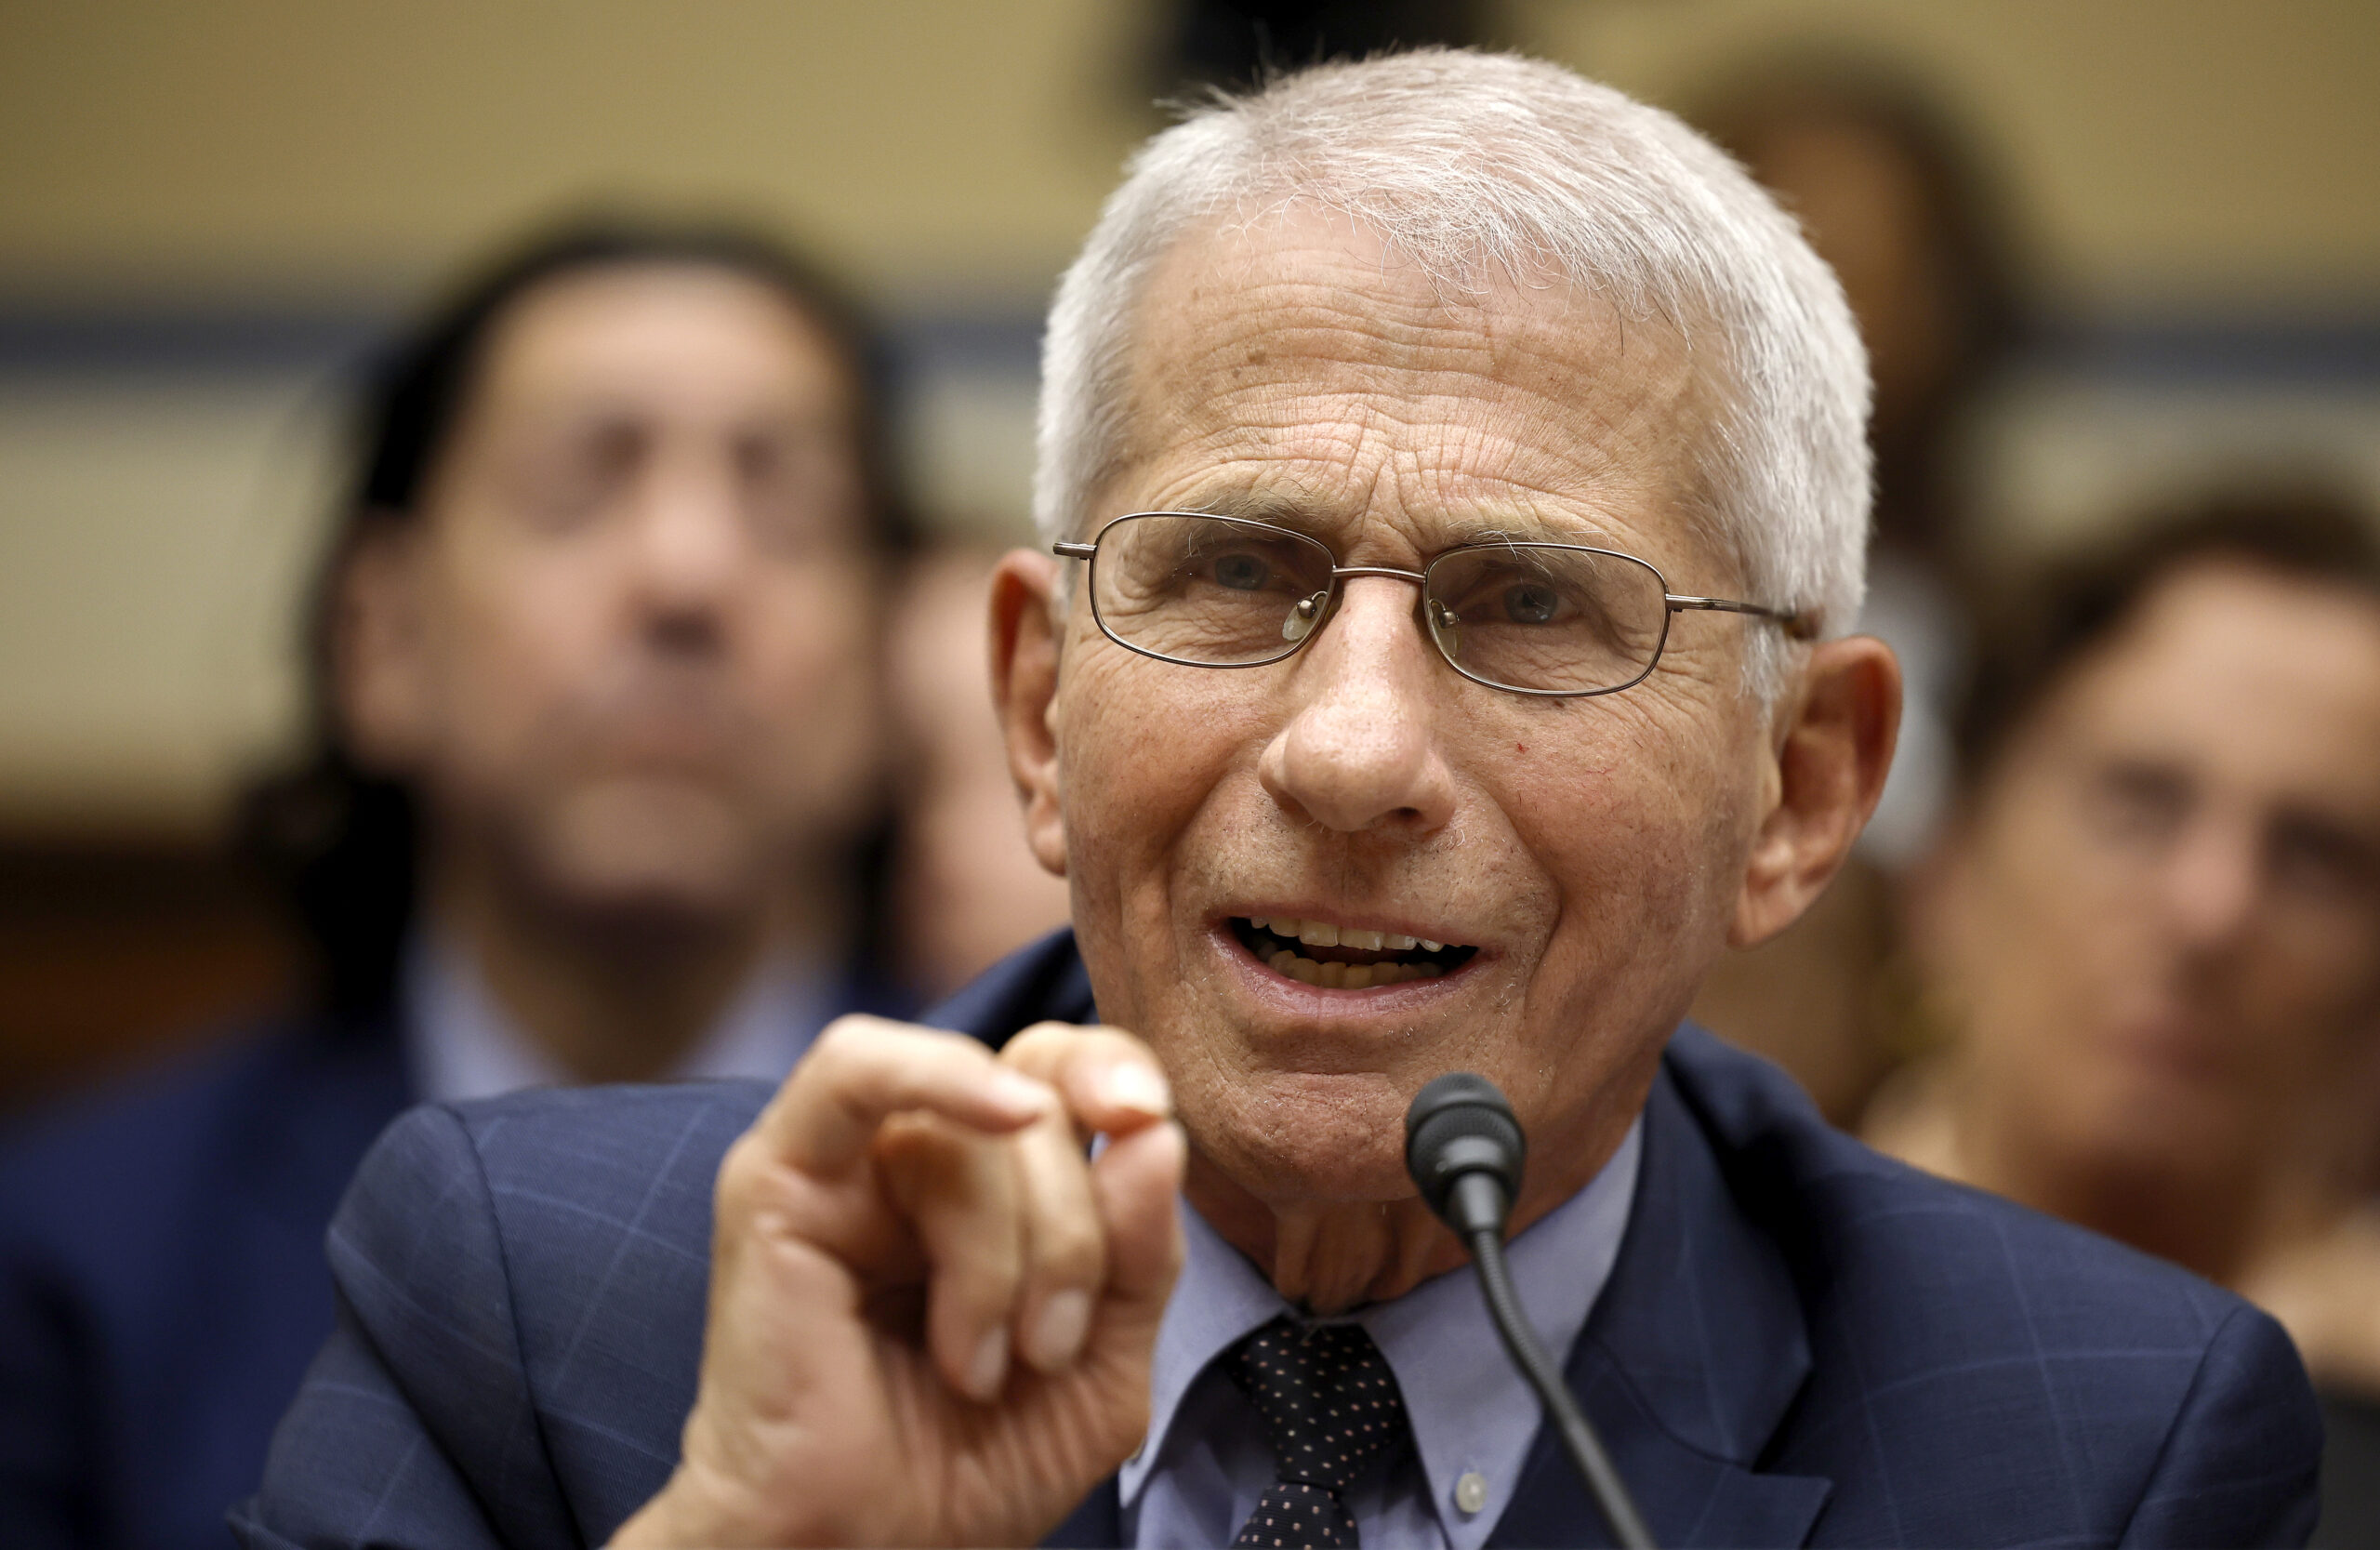 Fauci defends his work on COVID-19, says he has an ‘open mind’ on its origins • Missouri Independent